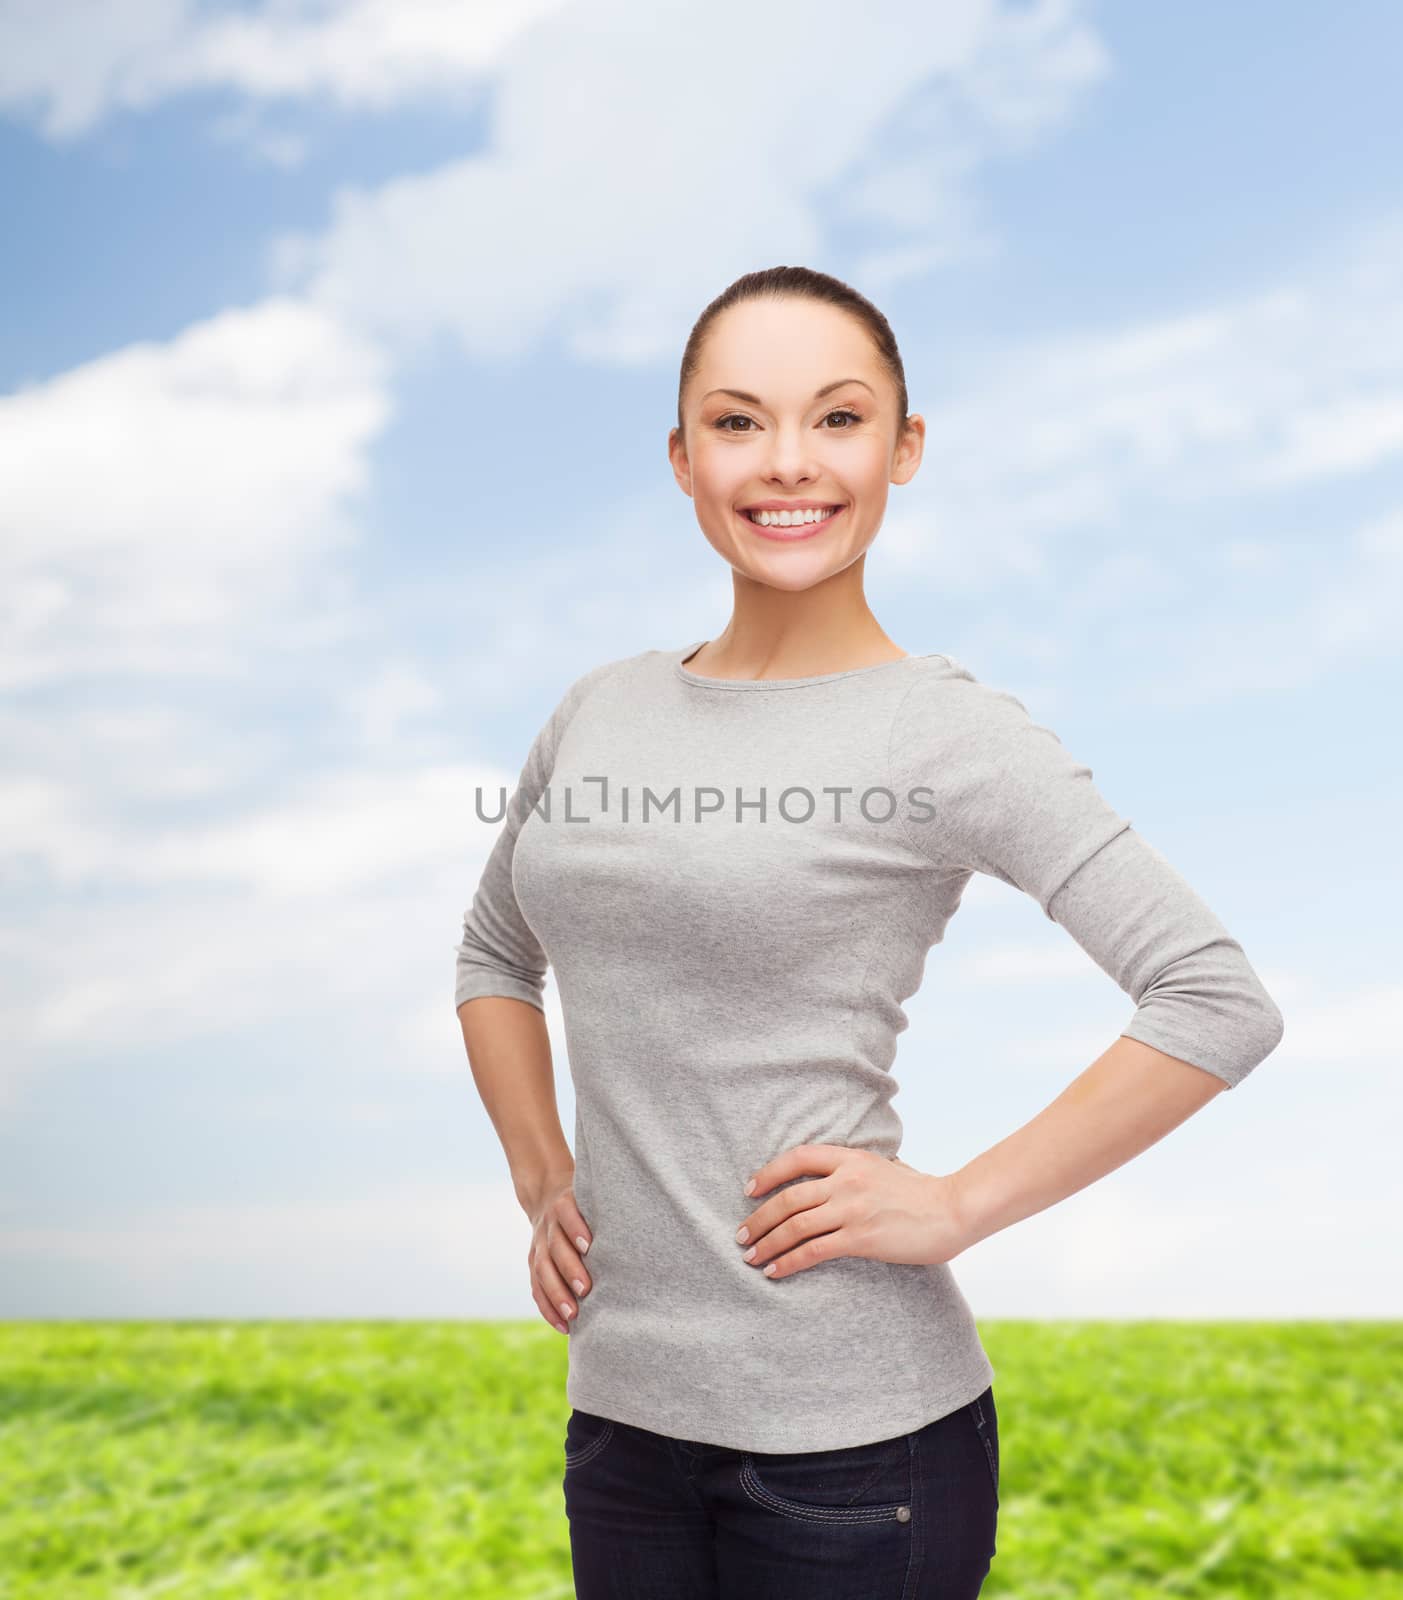 happiness people concept - smiling asian woman over white background